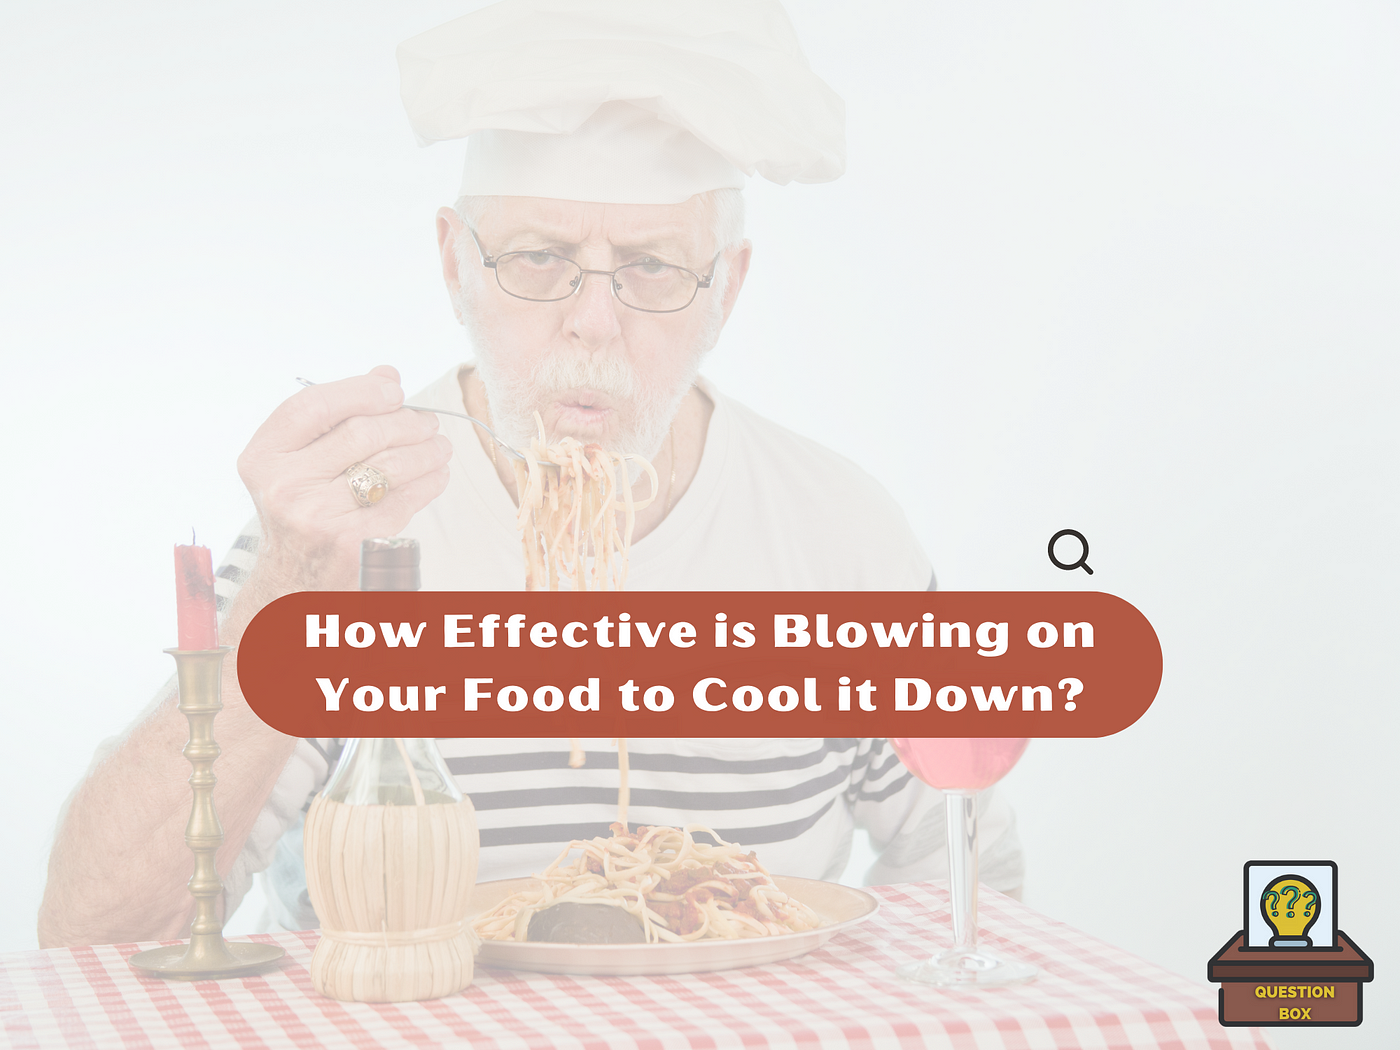 Is It Permissible to Blow on Food to Cool it Down?